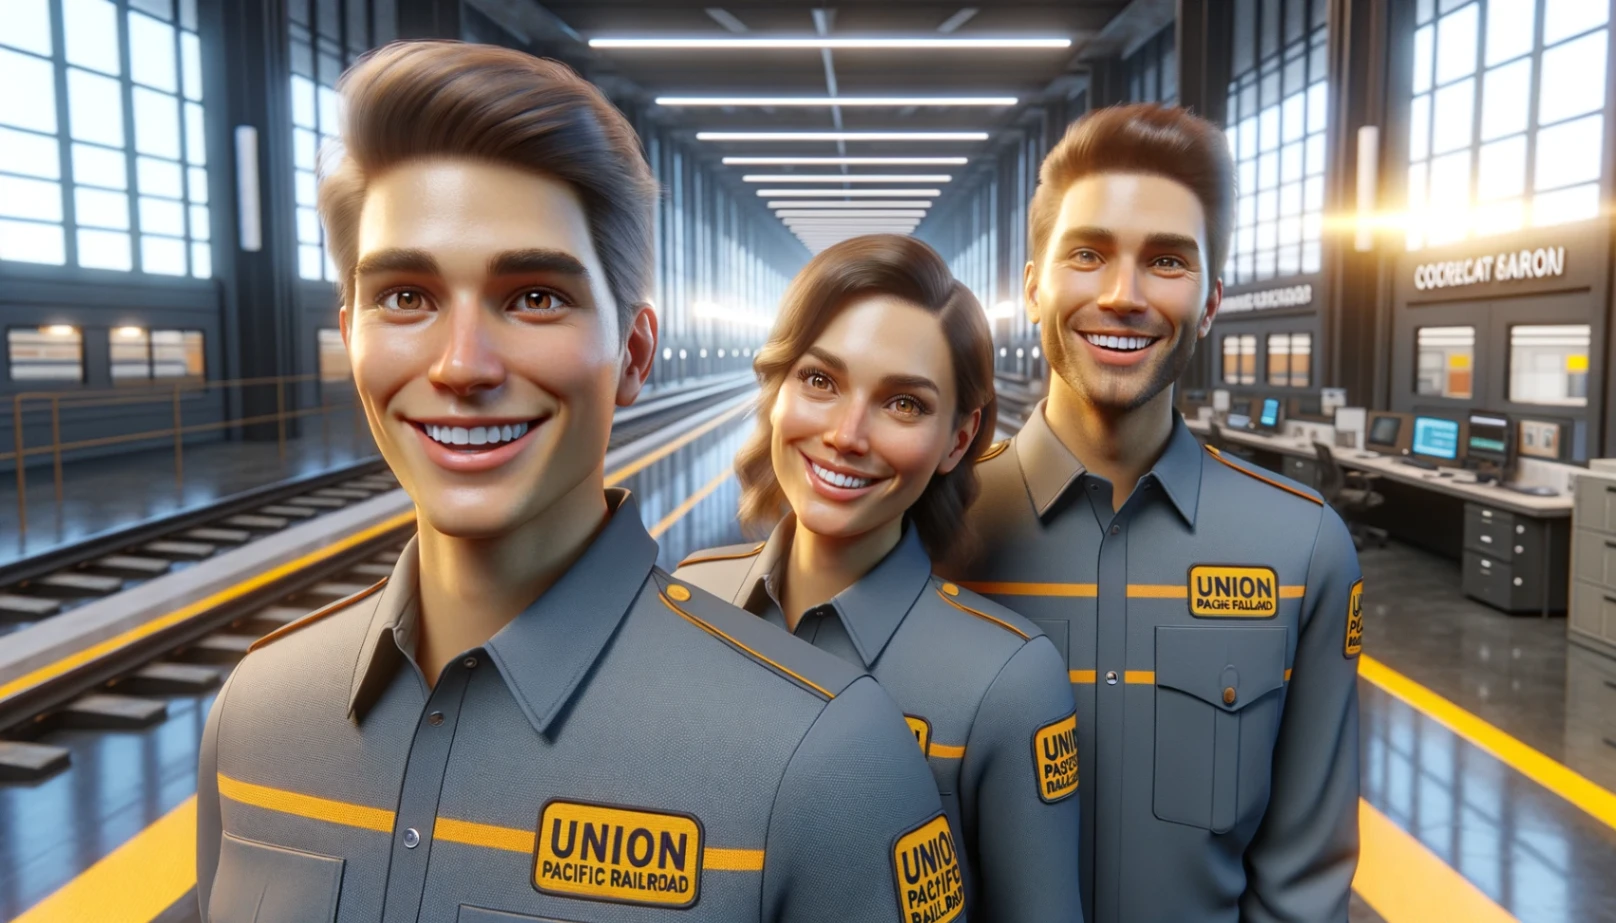 How to Apply for Positions at Union Pacific Railroad